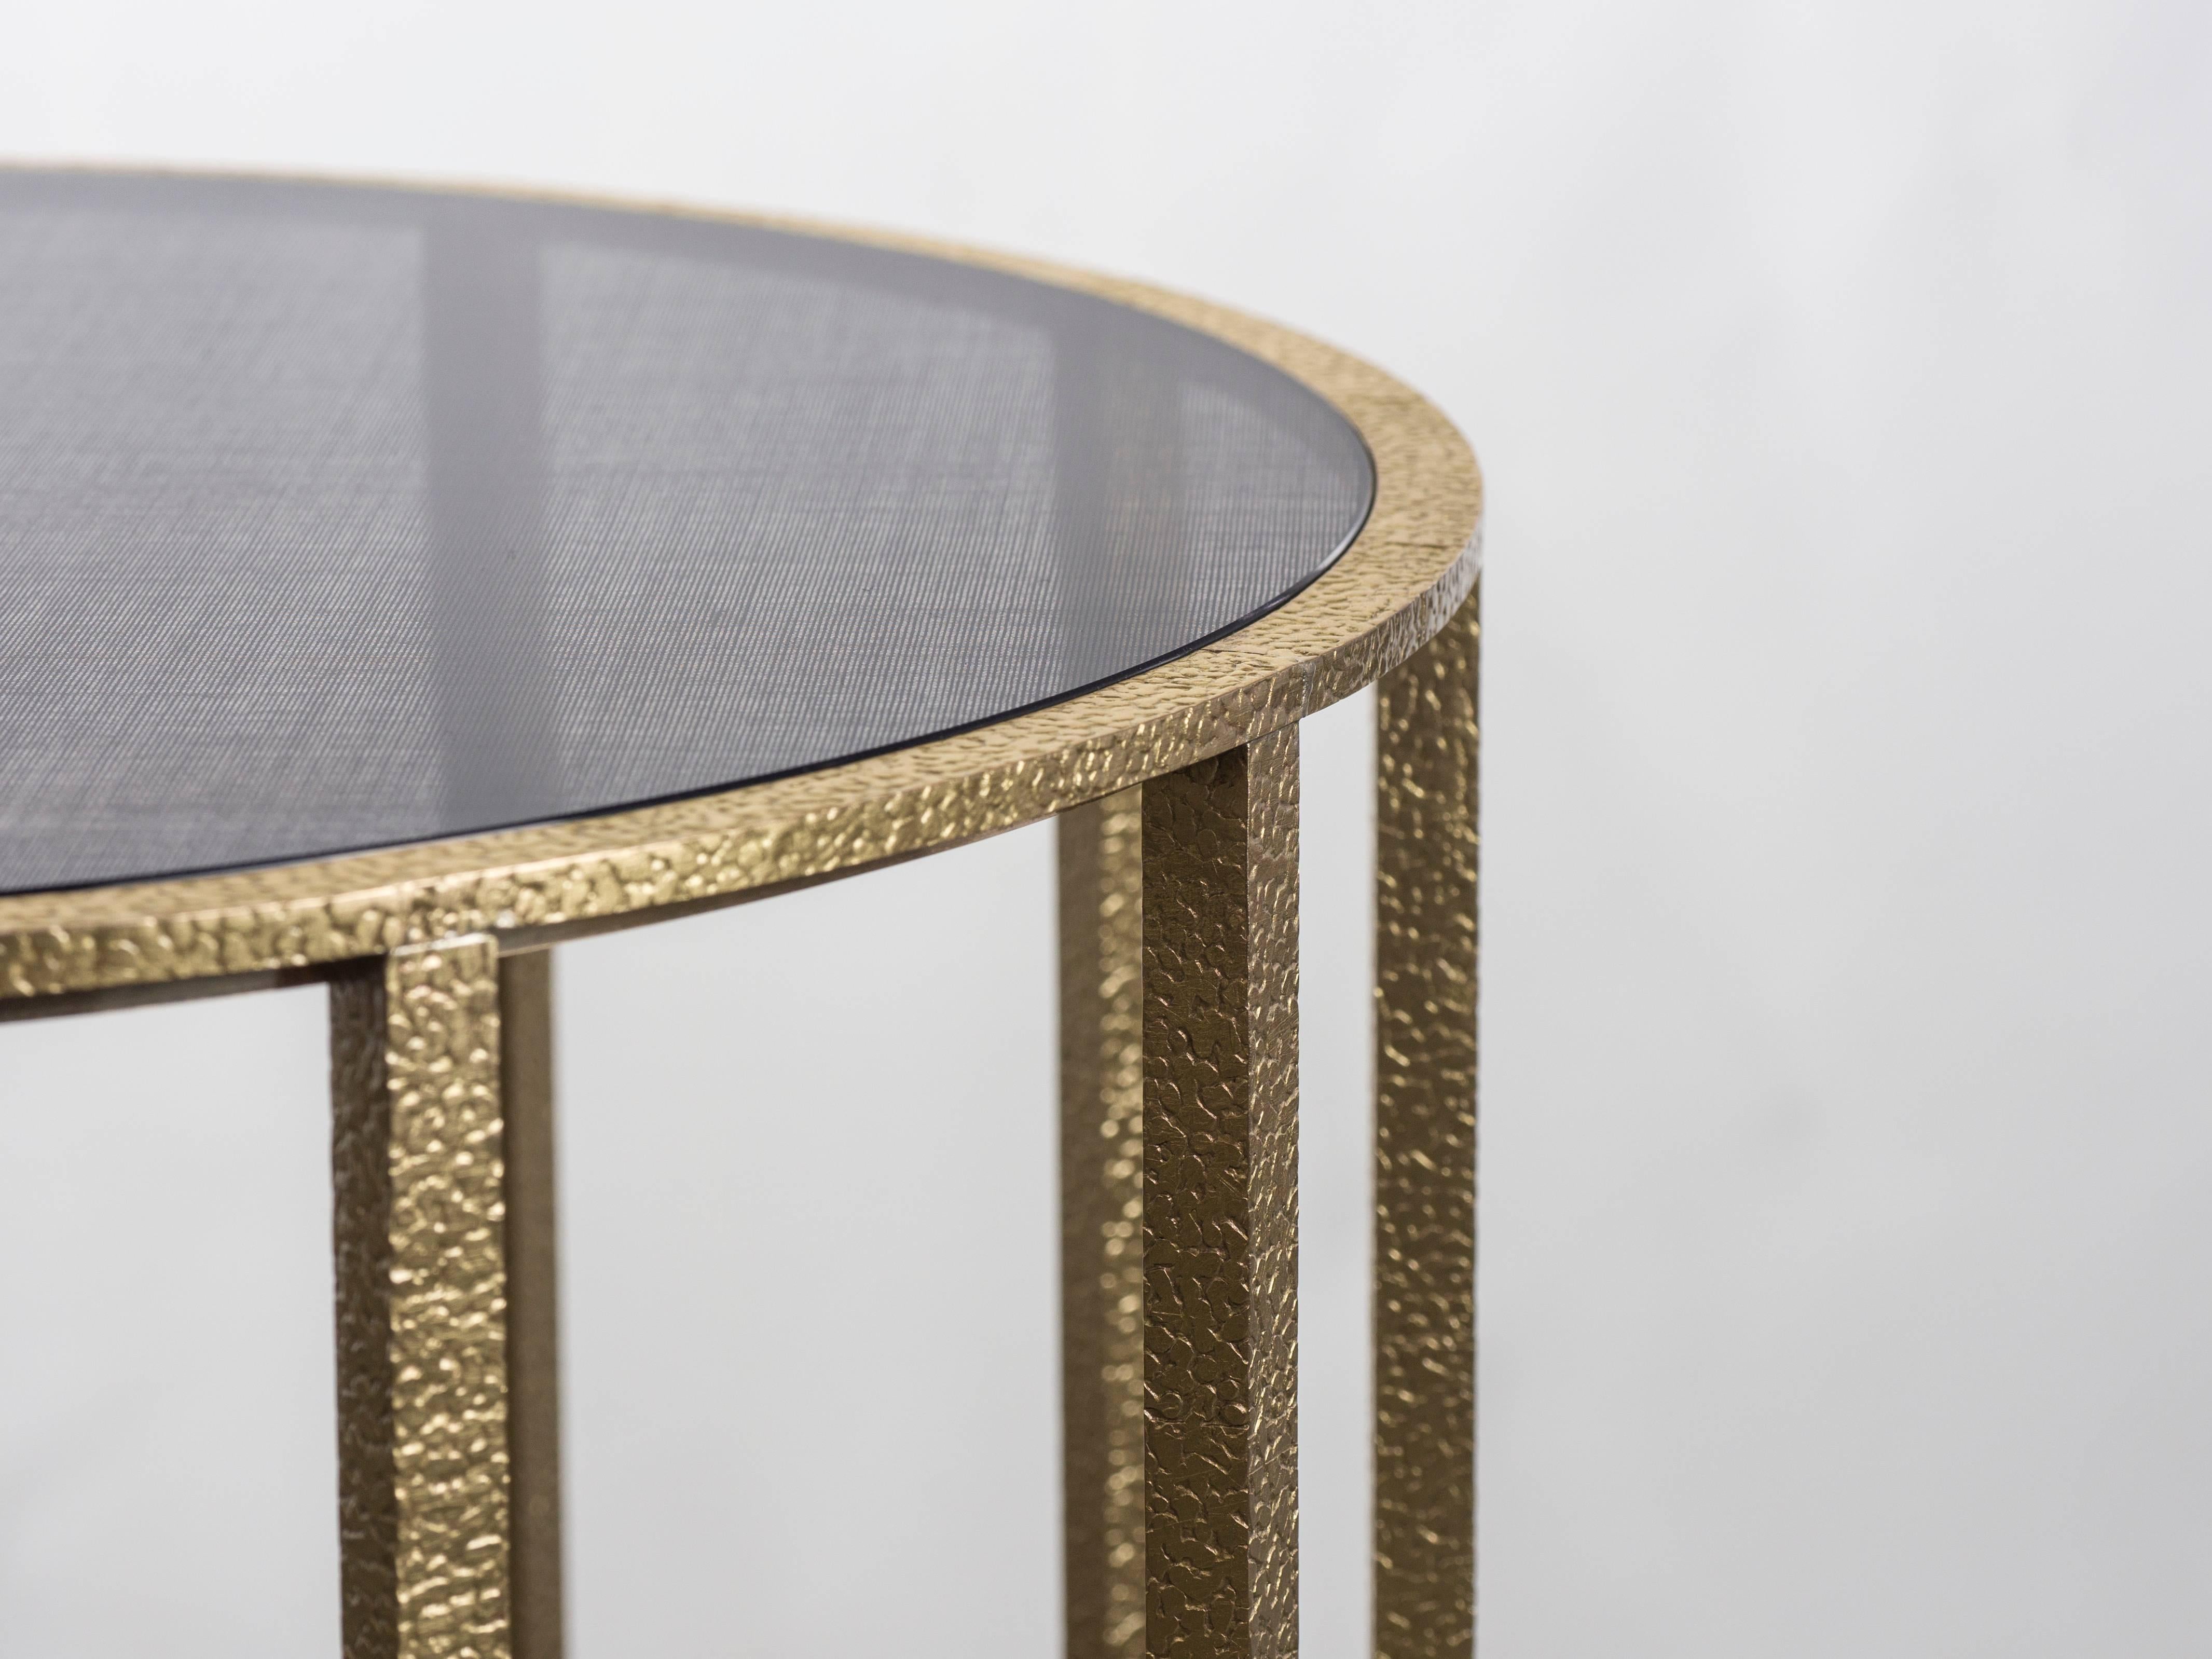 Round ‘Drum’ table 45 cm diameter x 50 cm height. Polished stamped brass with fabric inlay glass.

Created by Carta Bianca

Handmade in Italy.